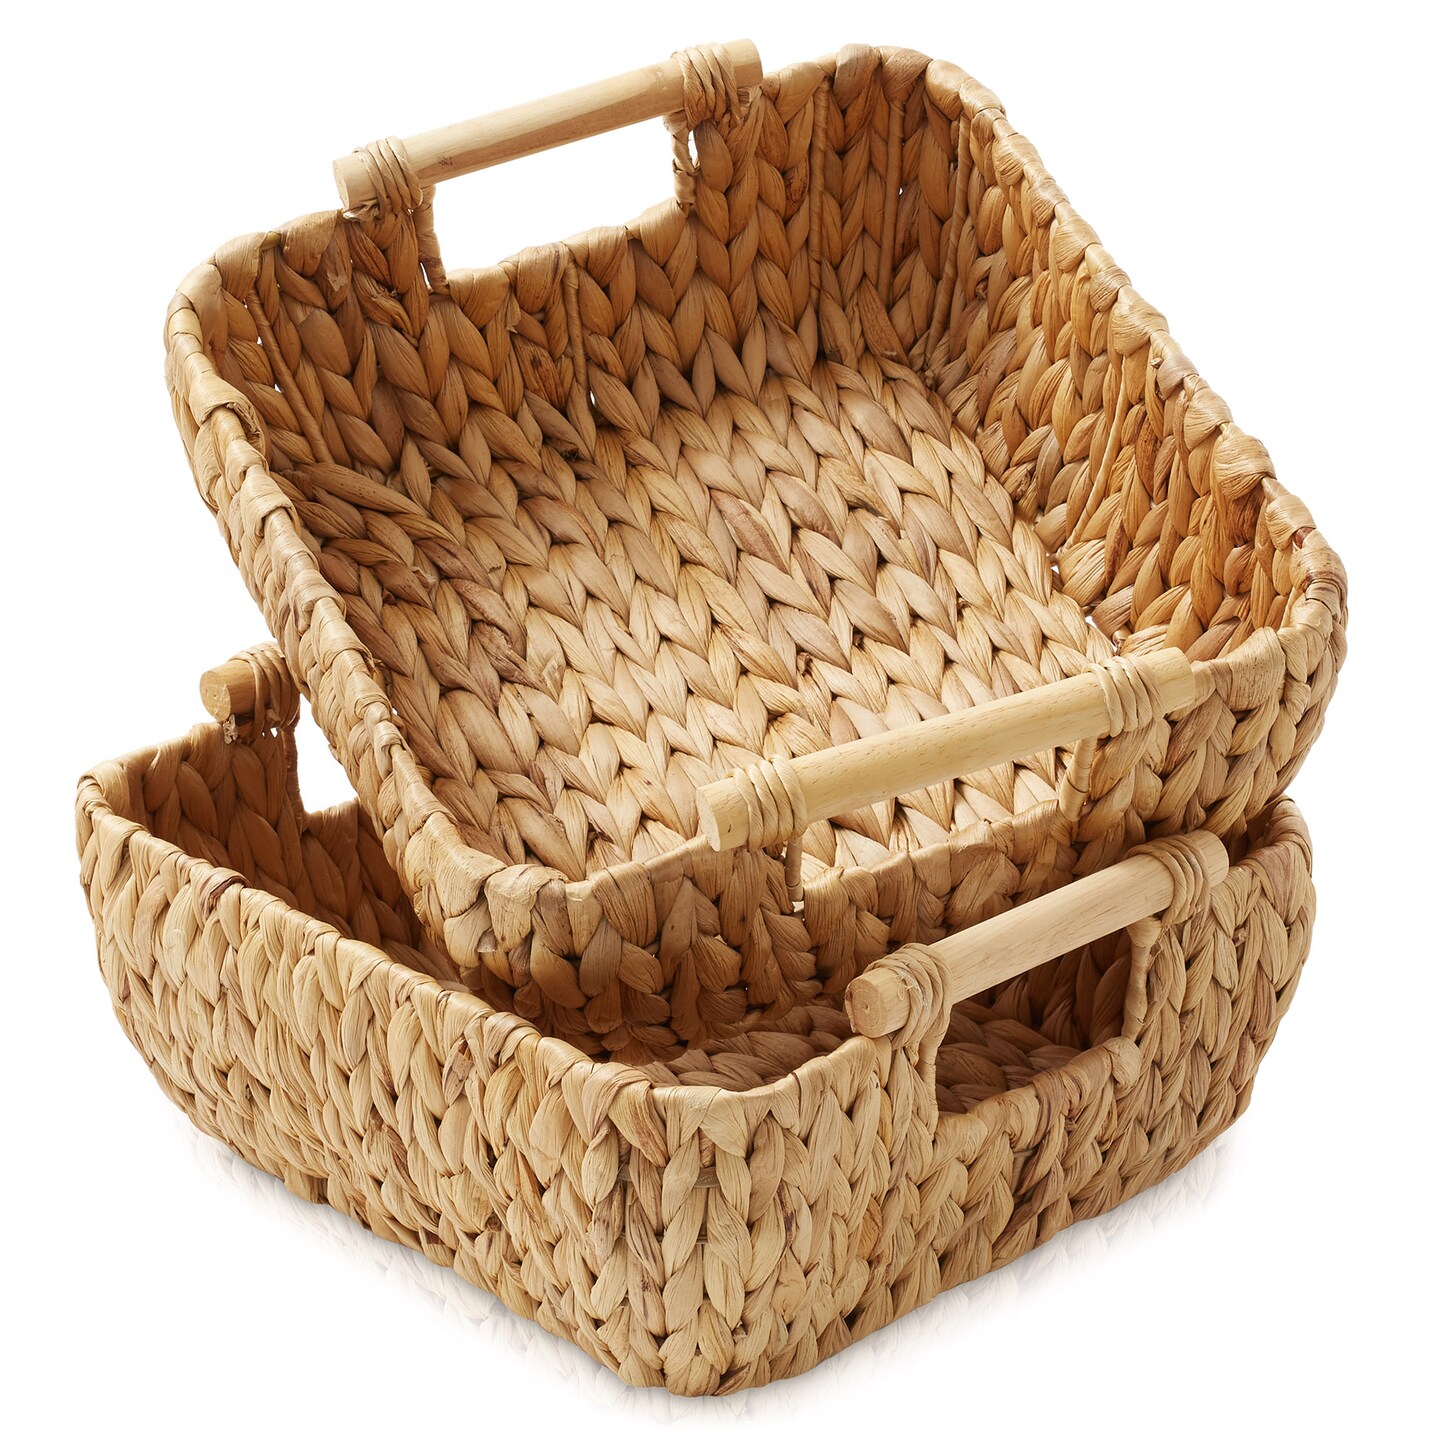 Casafield Set of 2 Water Hyacinth Oval Storage Baskets with Wooden Handles - Woven Bin Organizers